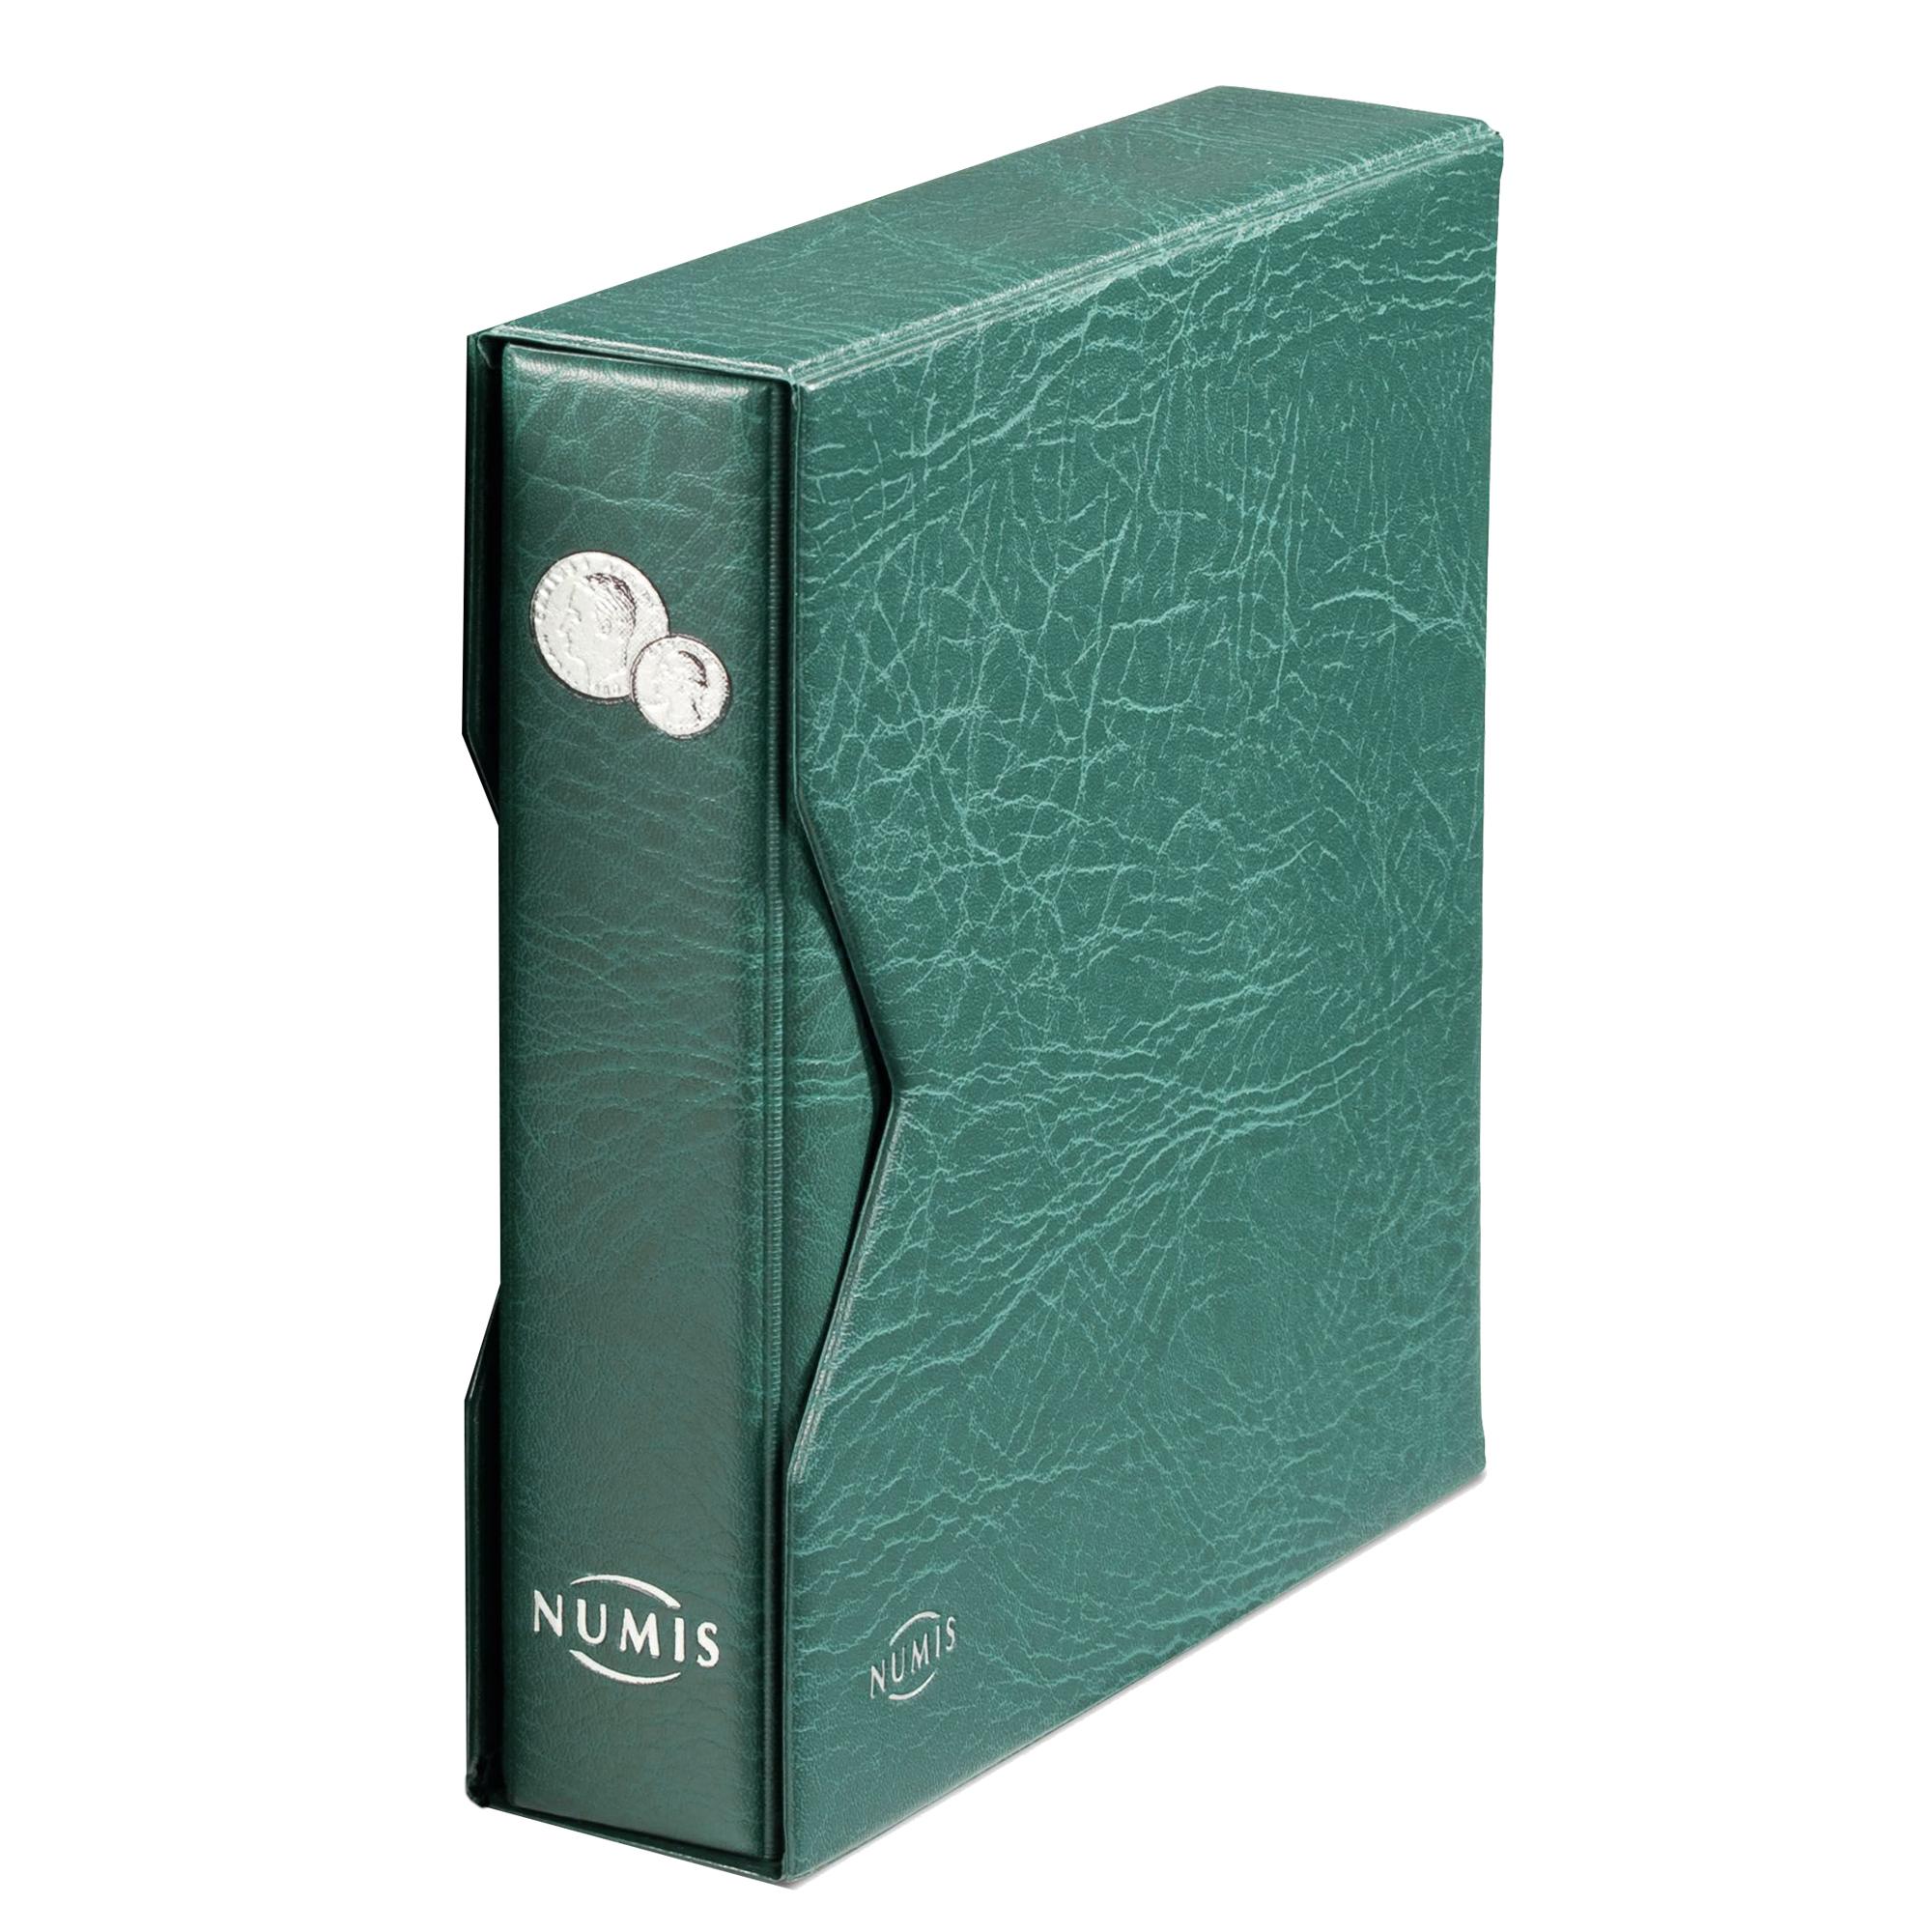 Numis Coin Album and Slipcase - Green - includes 5 refills